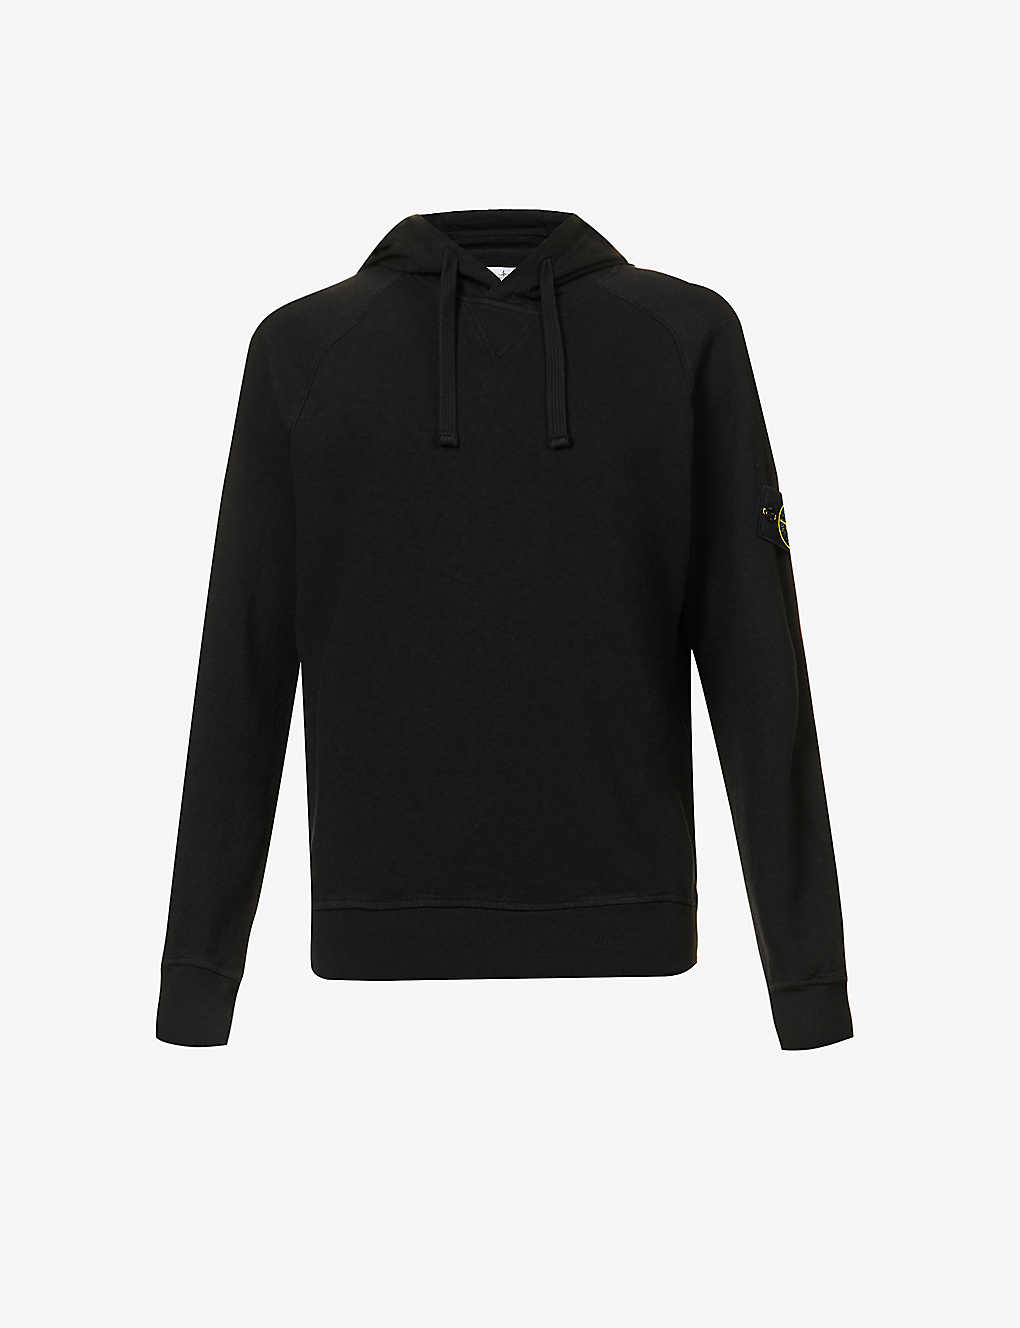 Stone Island Mens Black Compass-badge Relaxed-fit Cotton-jersey Hoody